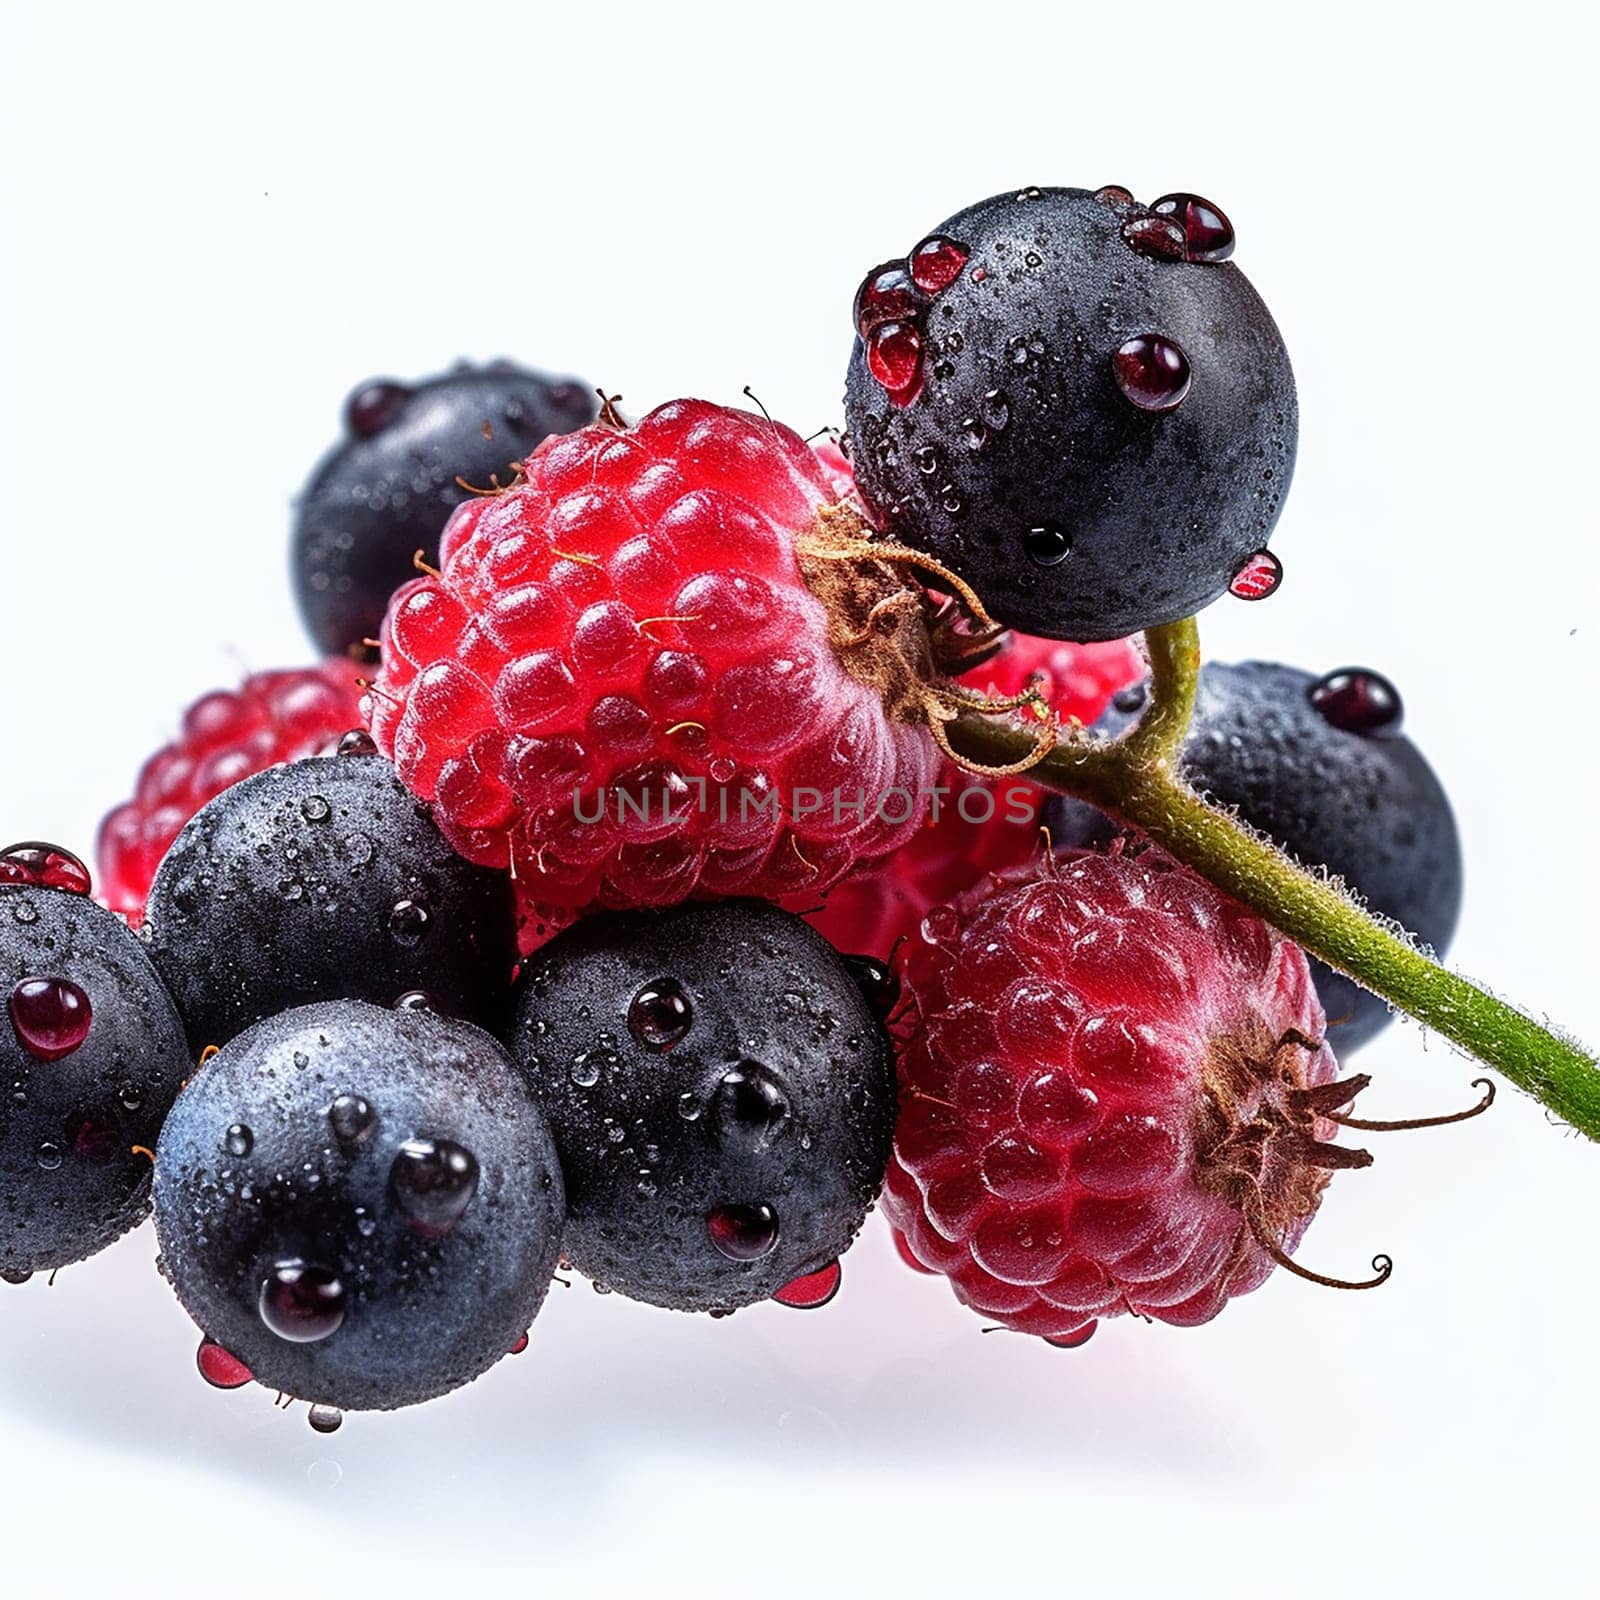 An assortment of fresh blueberries and raspberries isolated on white background.